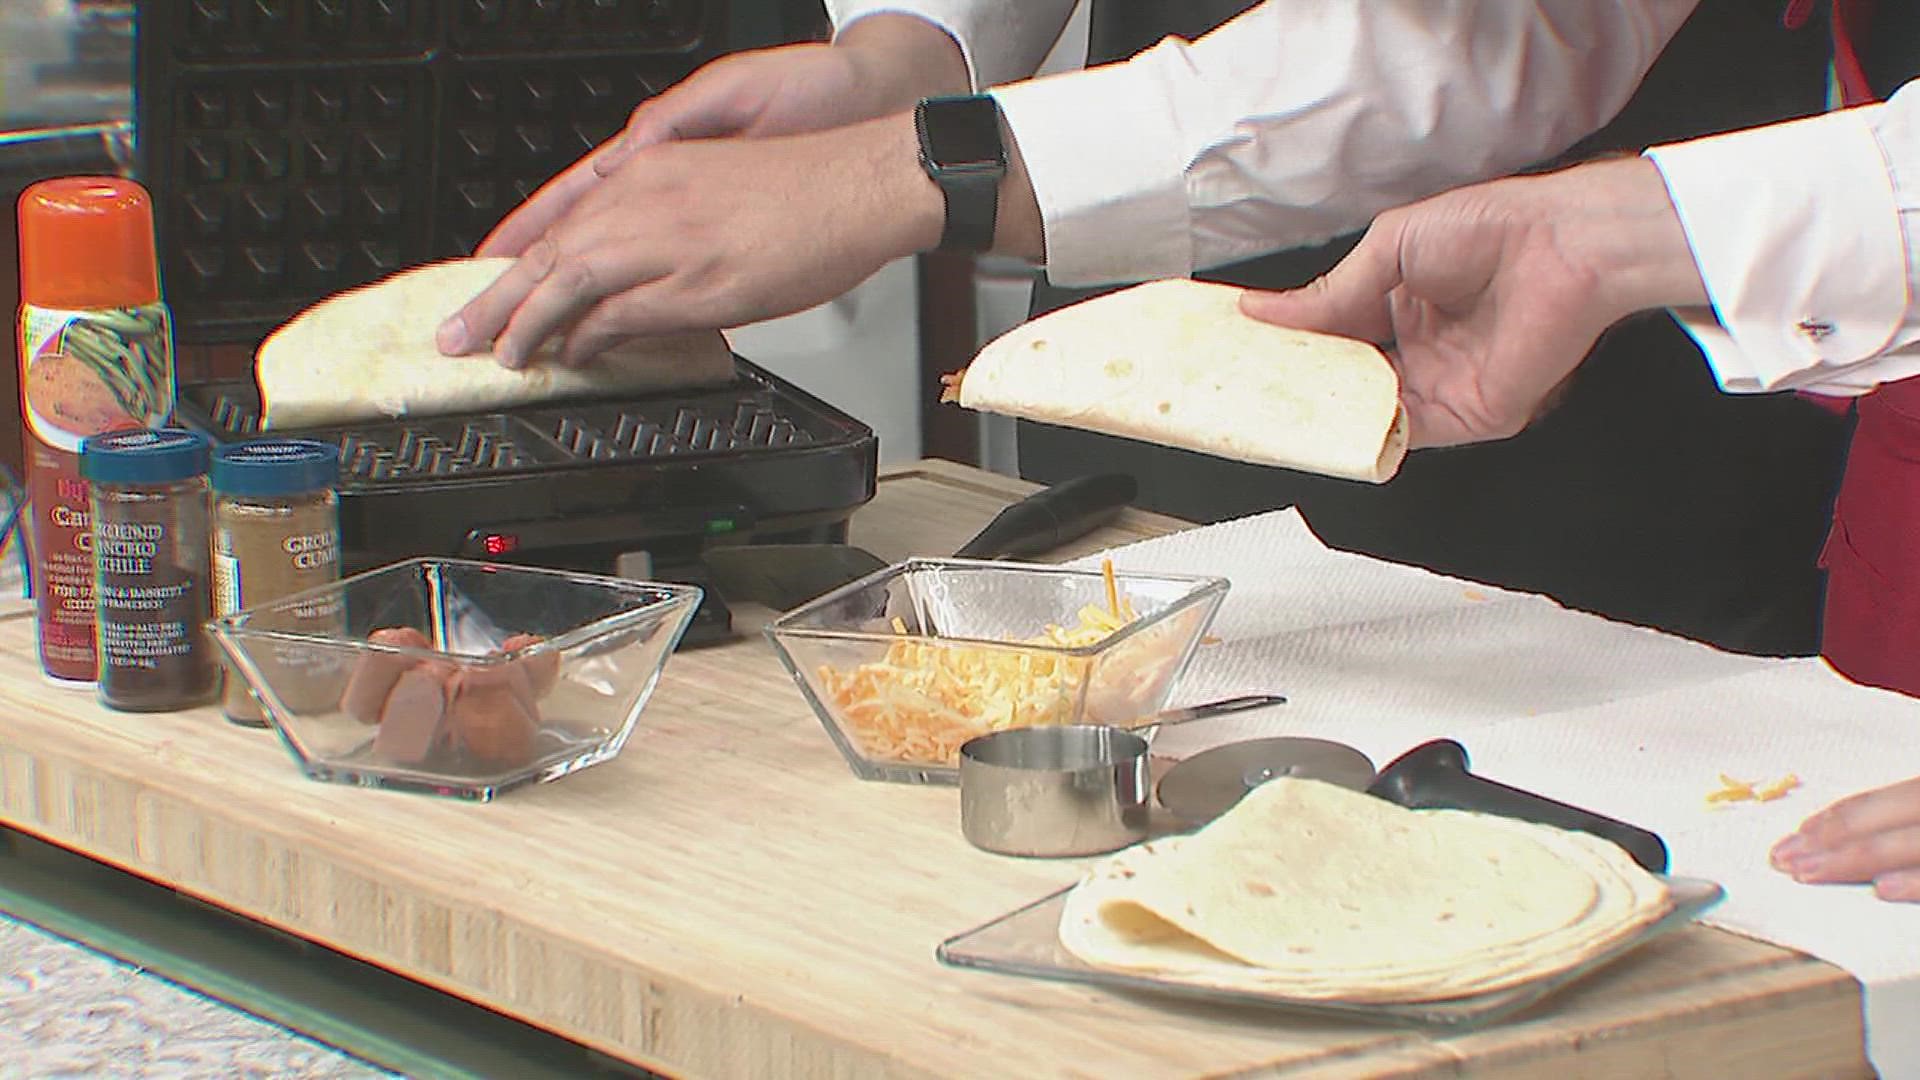 September 25th is National Quesadilla Day and we are celebrating... with a waffle iron!